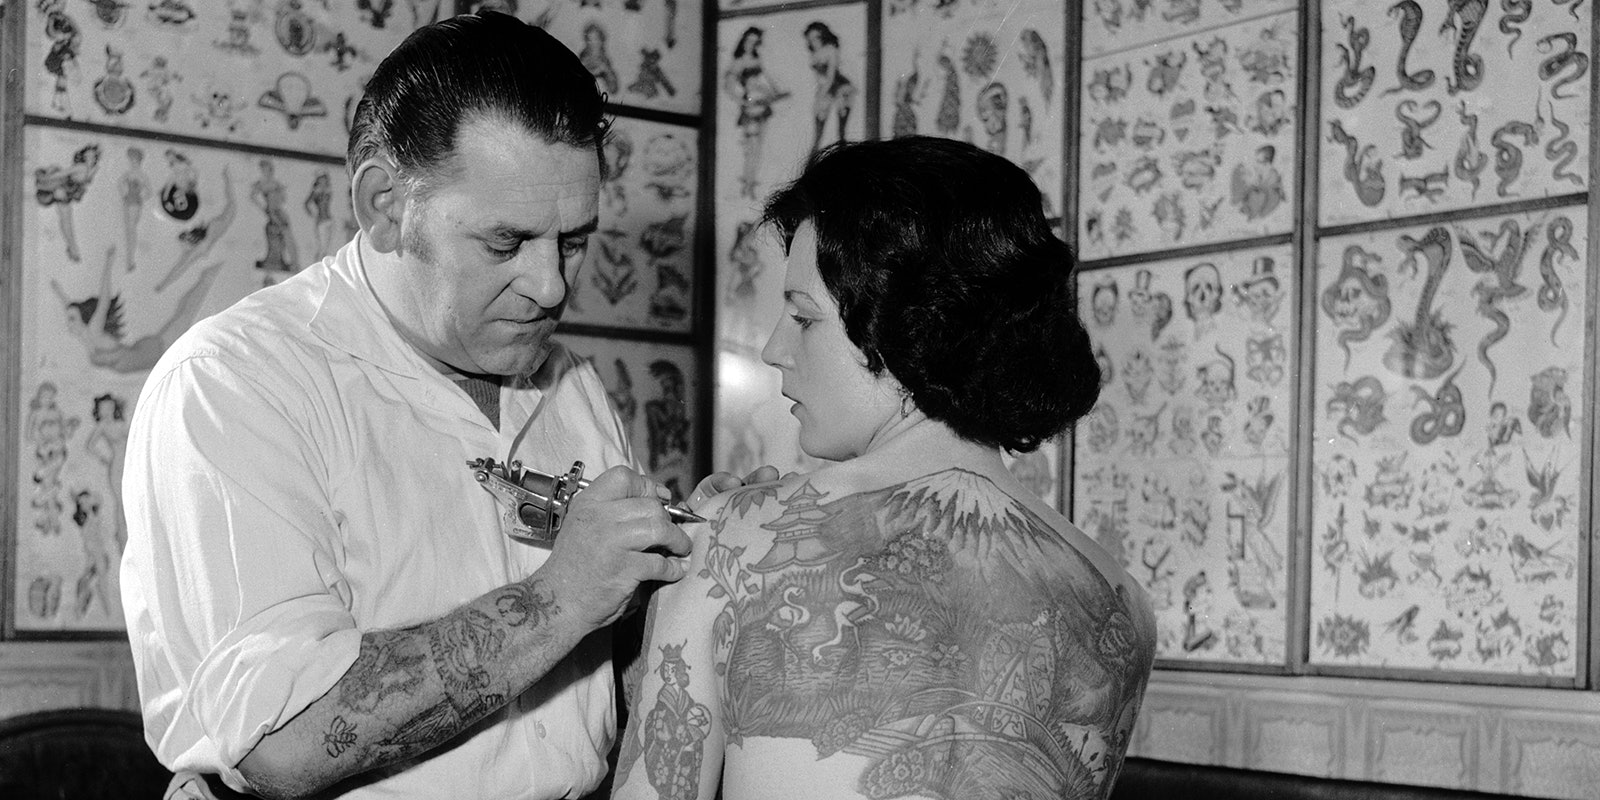 Friday the 13th Tattoo Deals Where to Find 13 Tattoos  Money